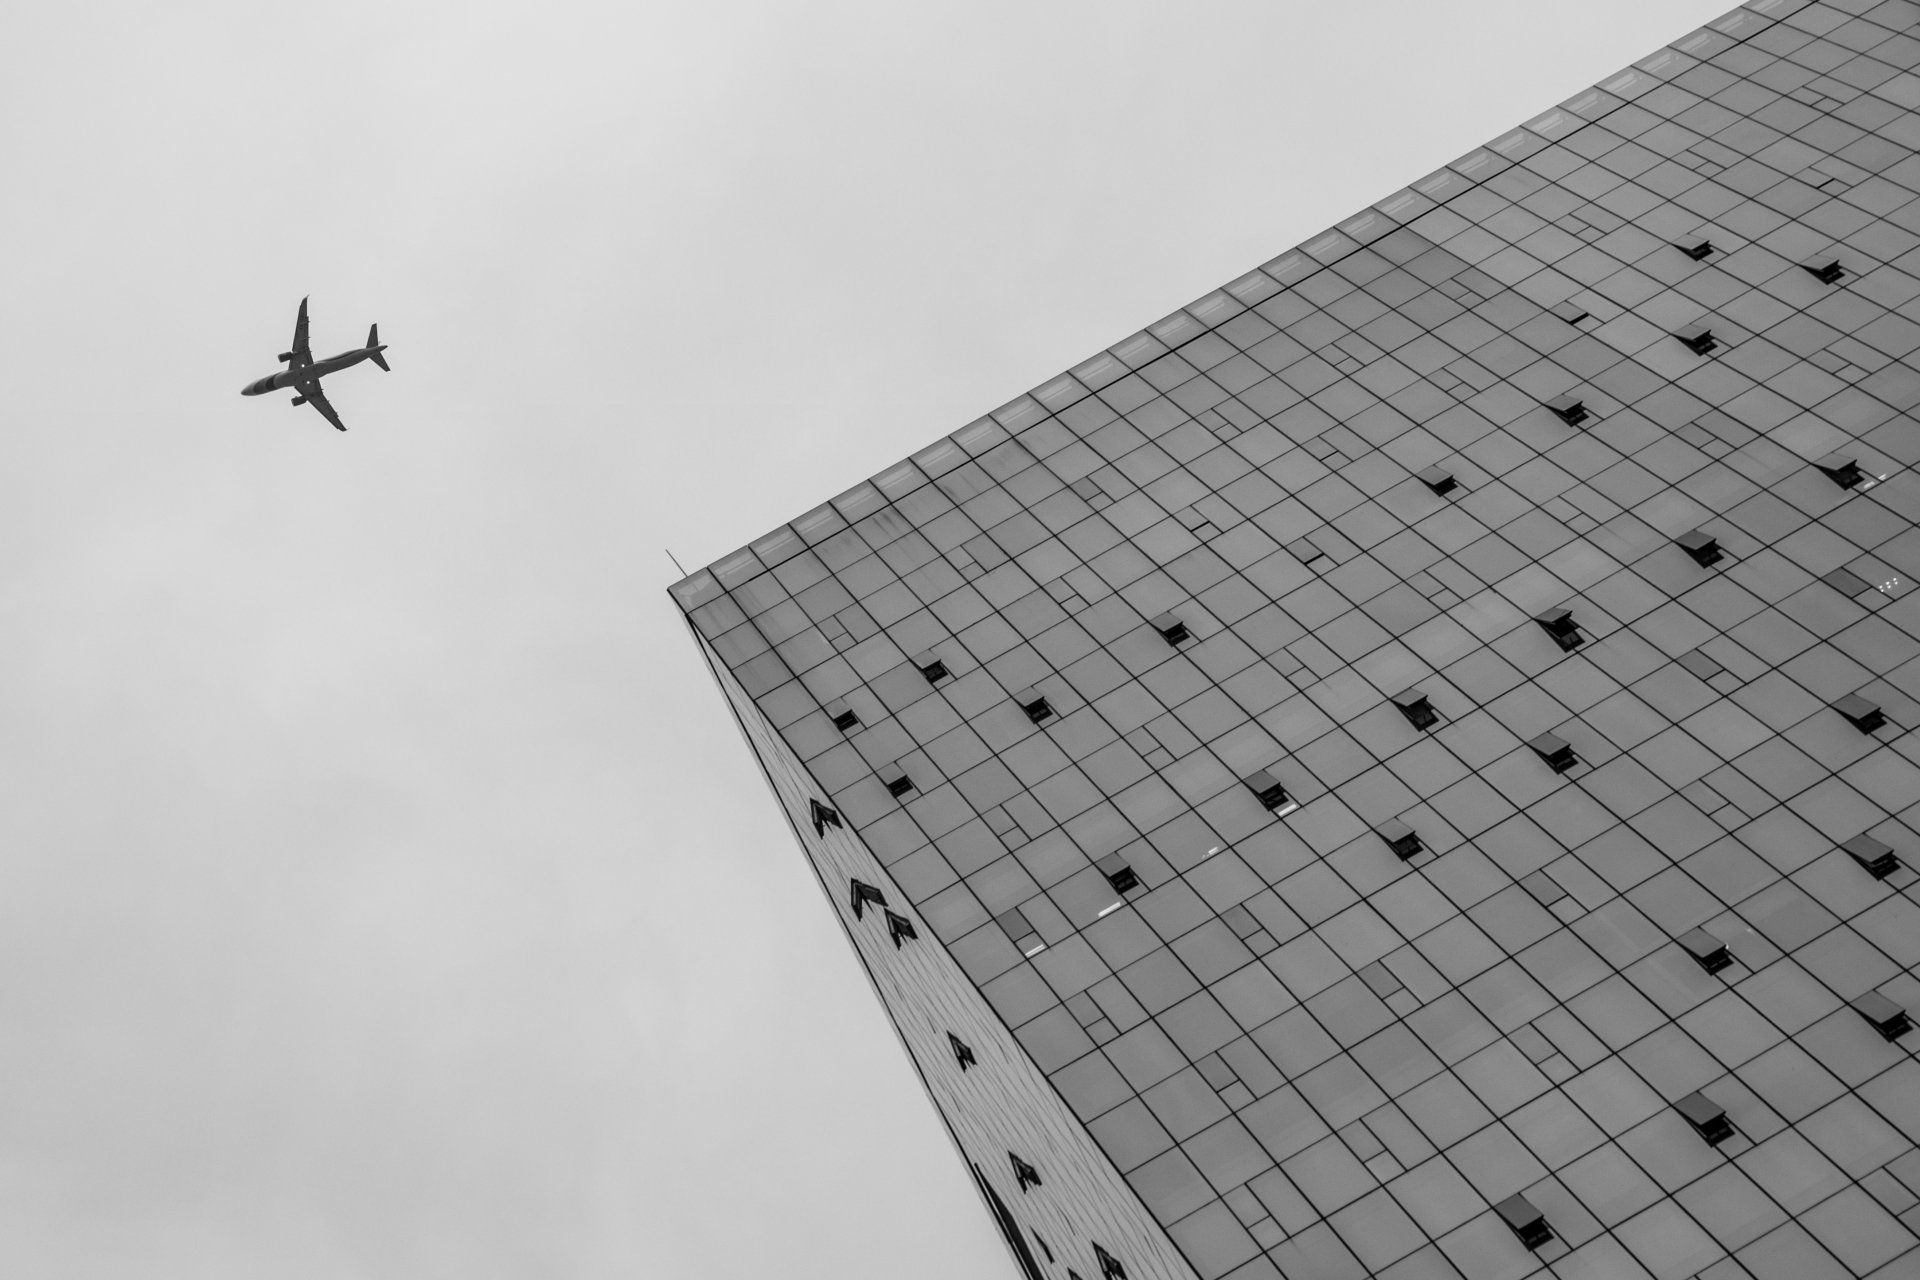 low angle view building plane flying near it sky